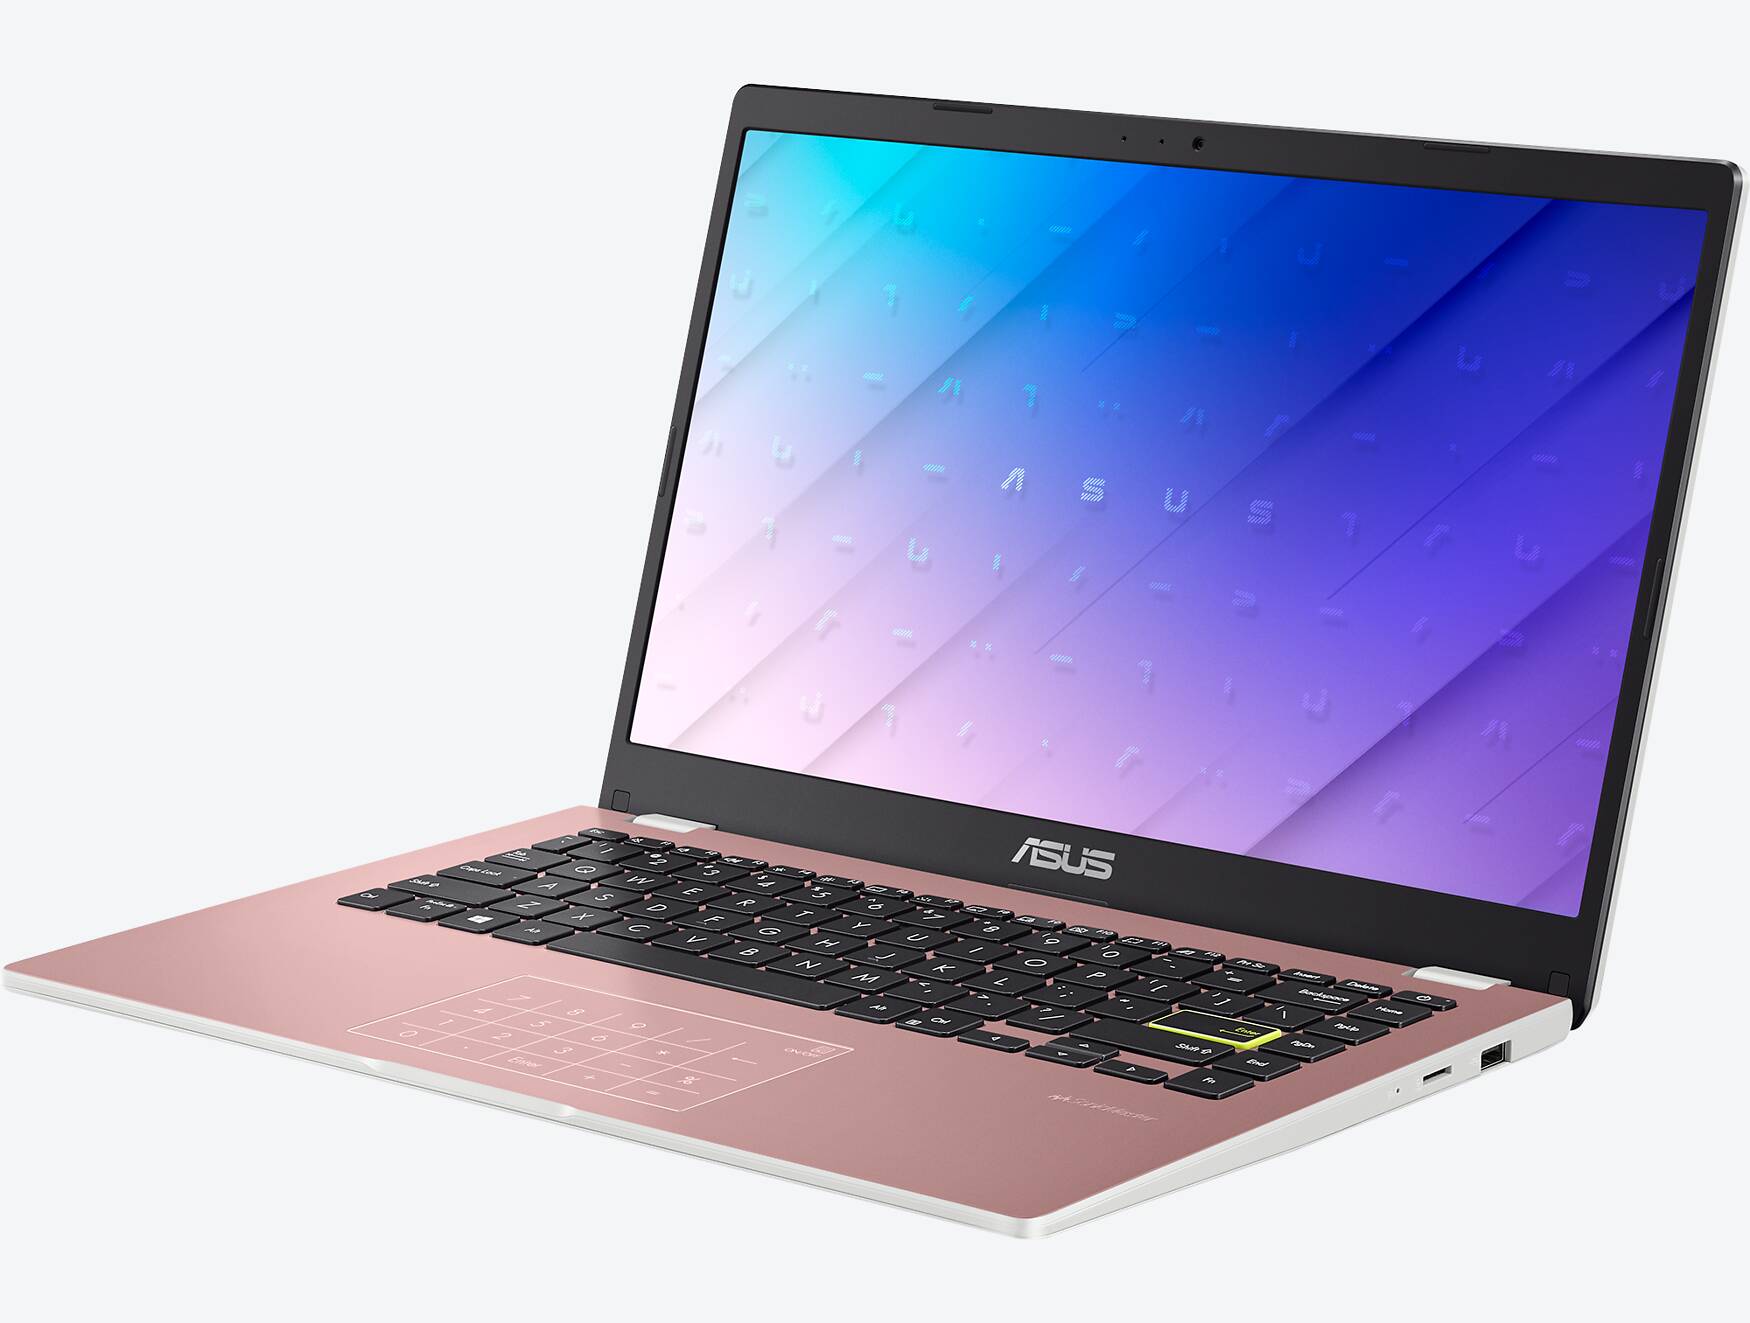 Asus Vivobook E410ma Bv076t Rosa Tests And Daten 9273